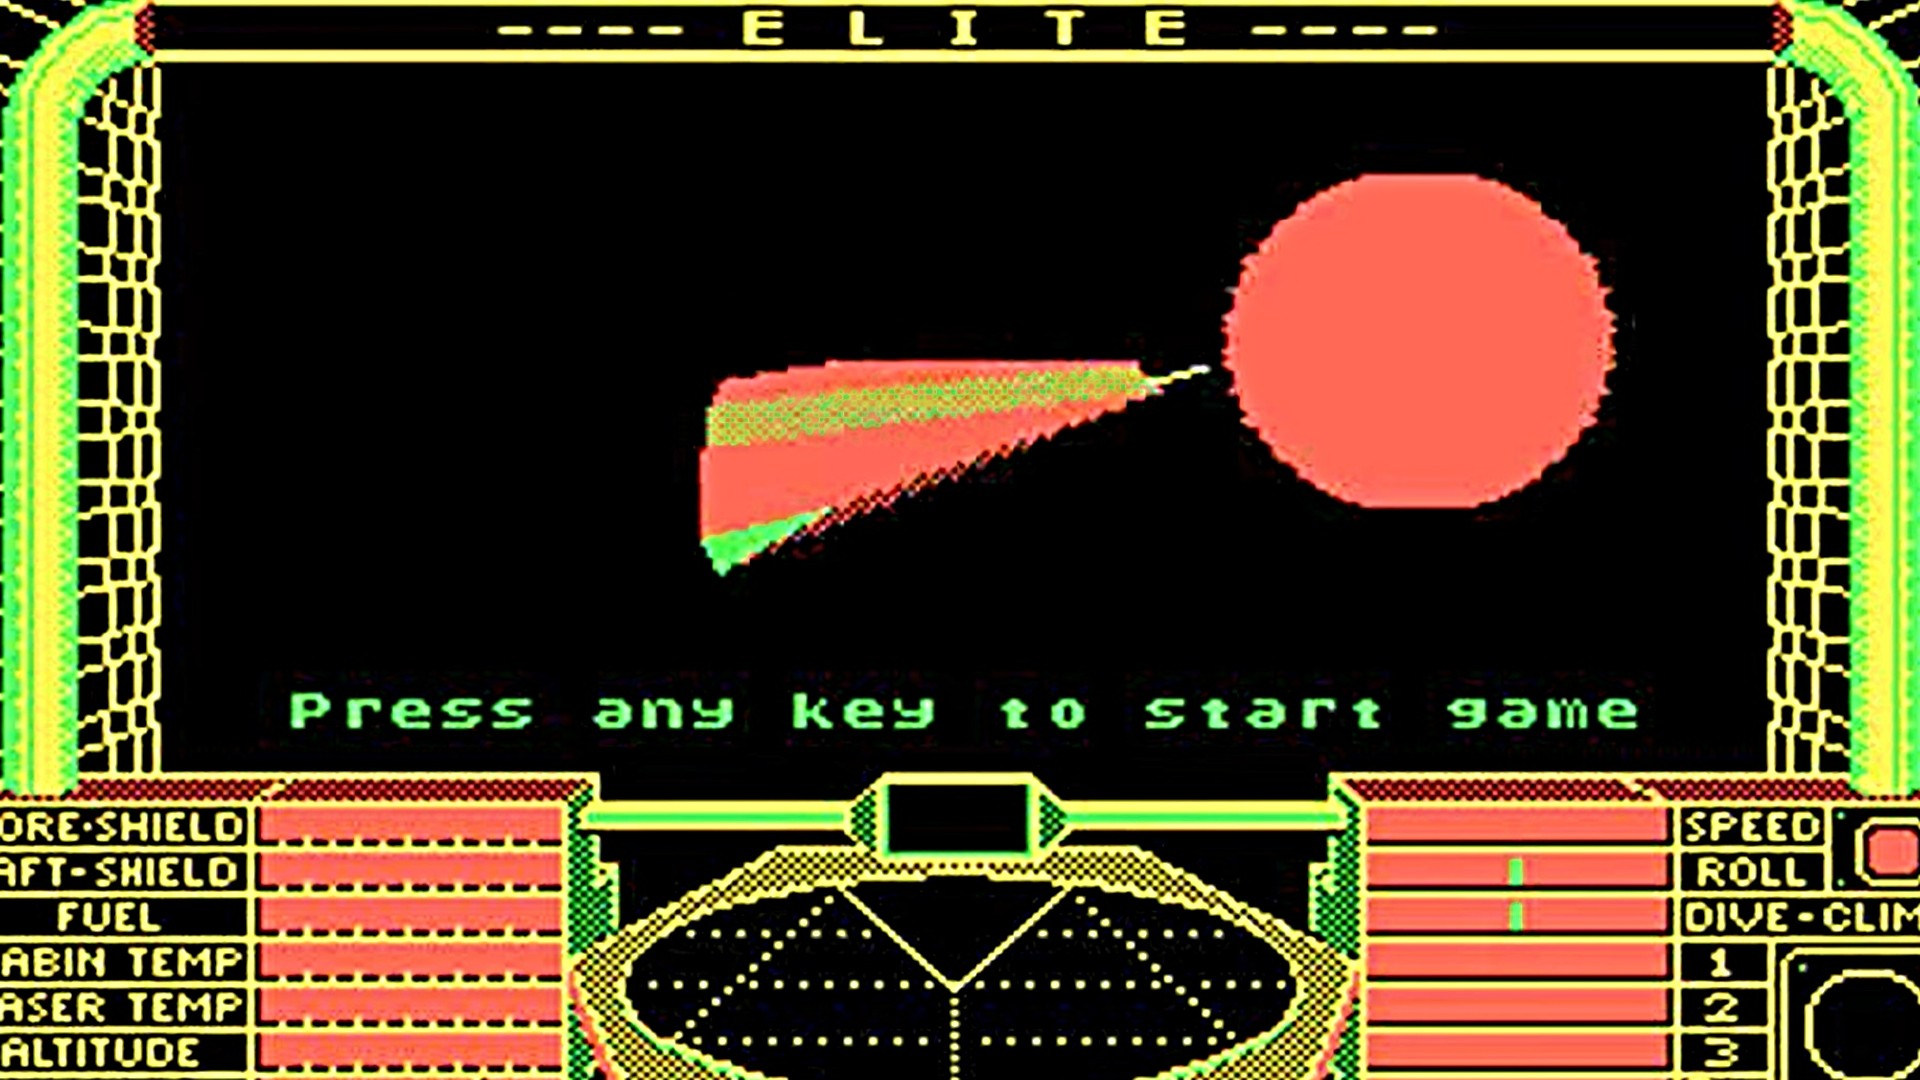 Starfield can wait, as retro RPG Elite now lets you build the universe